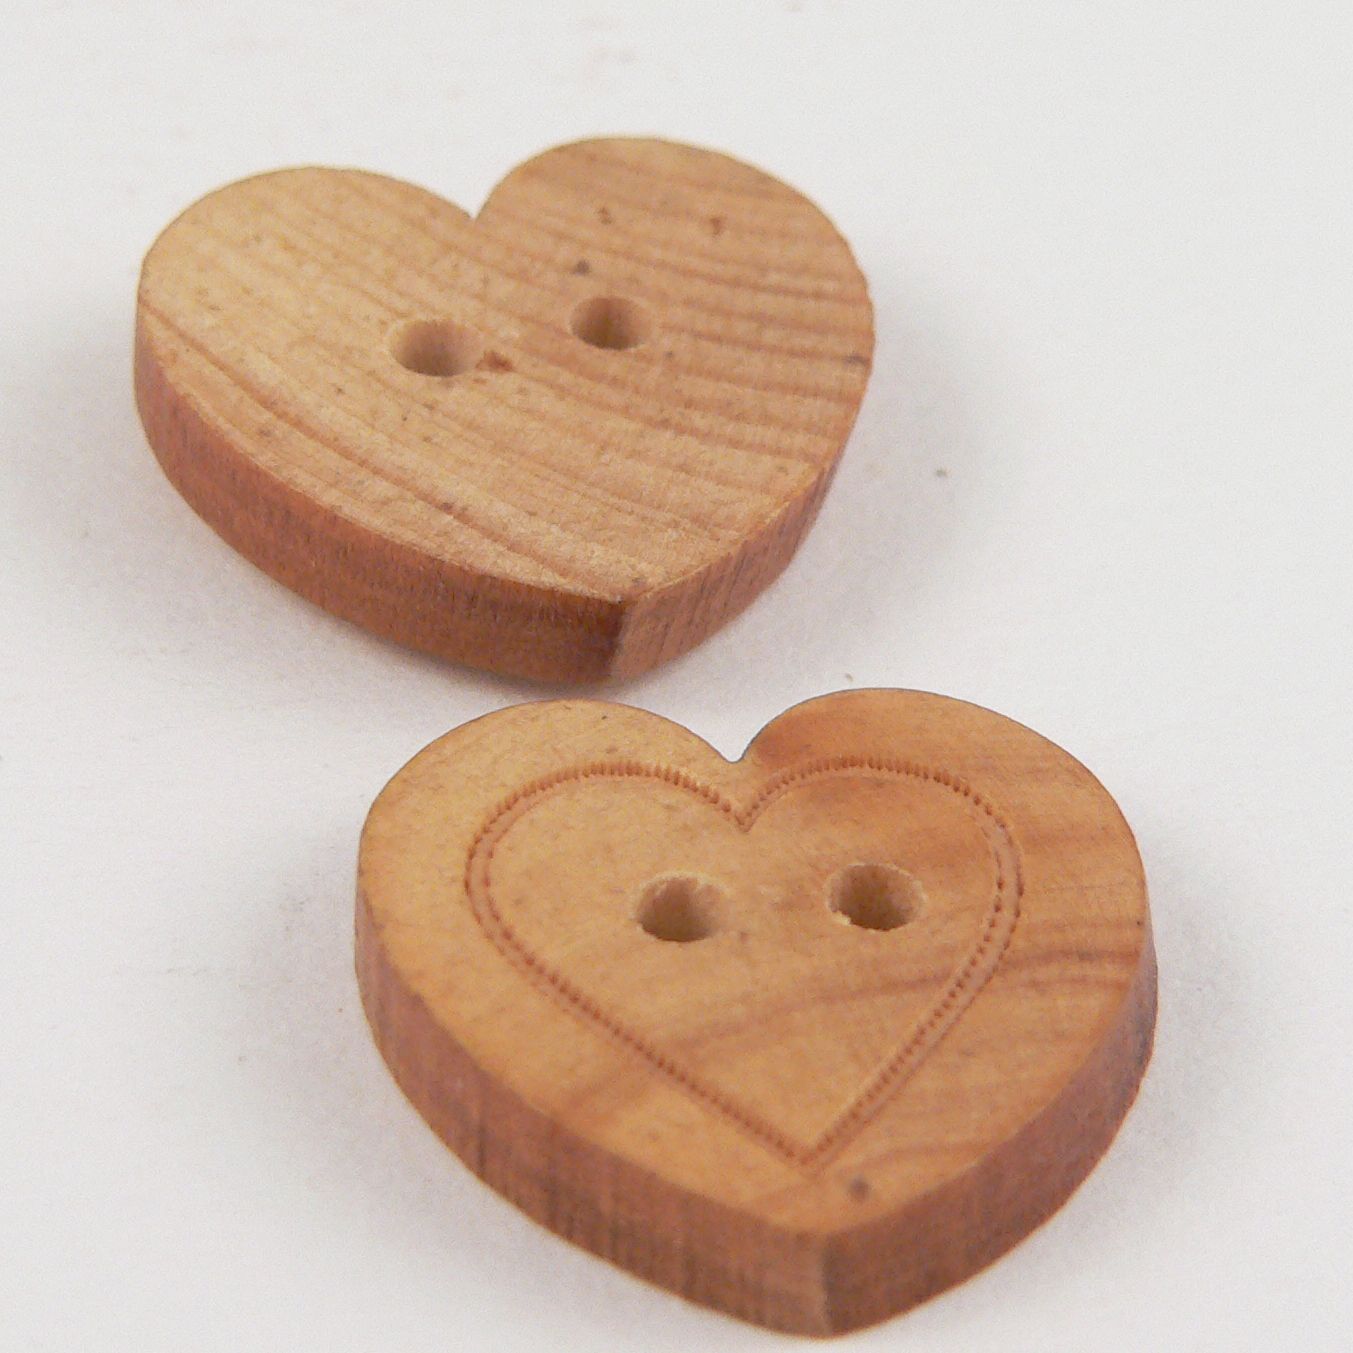 100x Wooden Heart Shape Buttons for Crafts Supplies Sewing 2 Holes 13x15mm